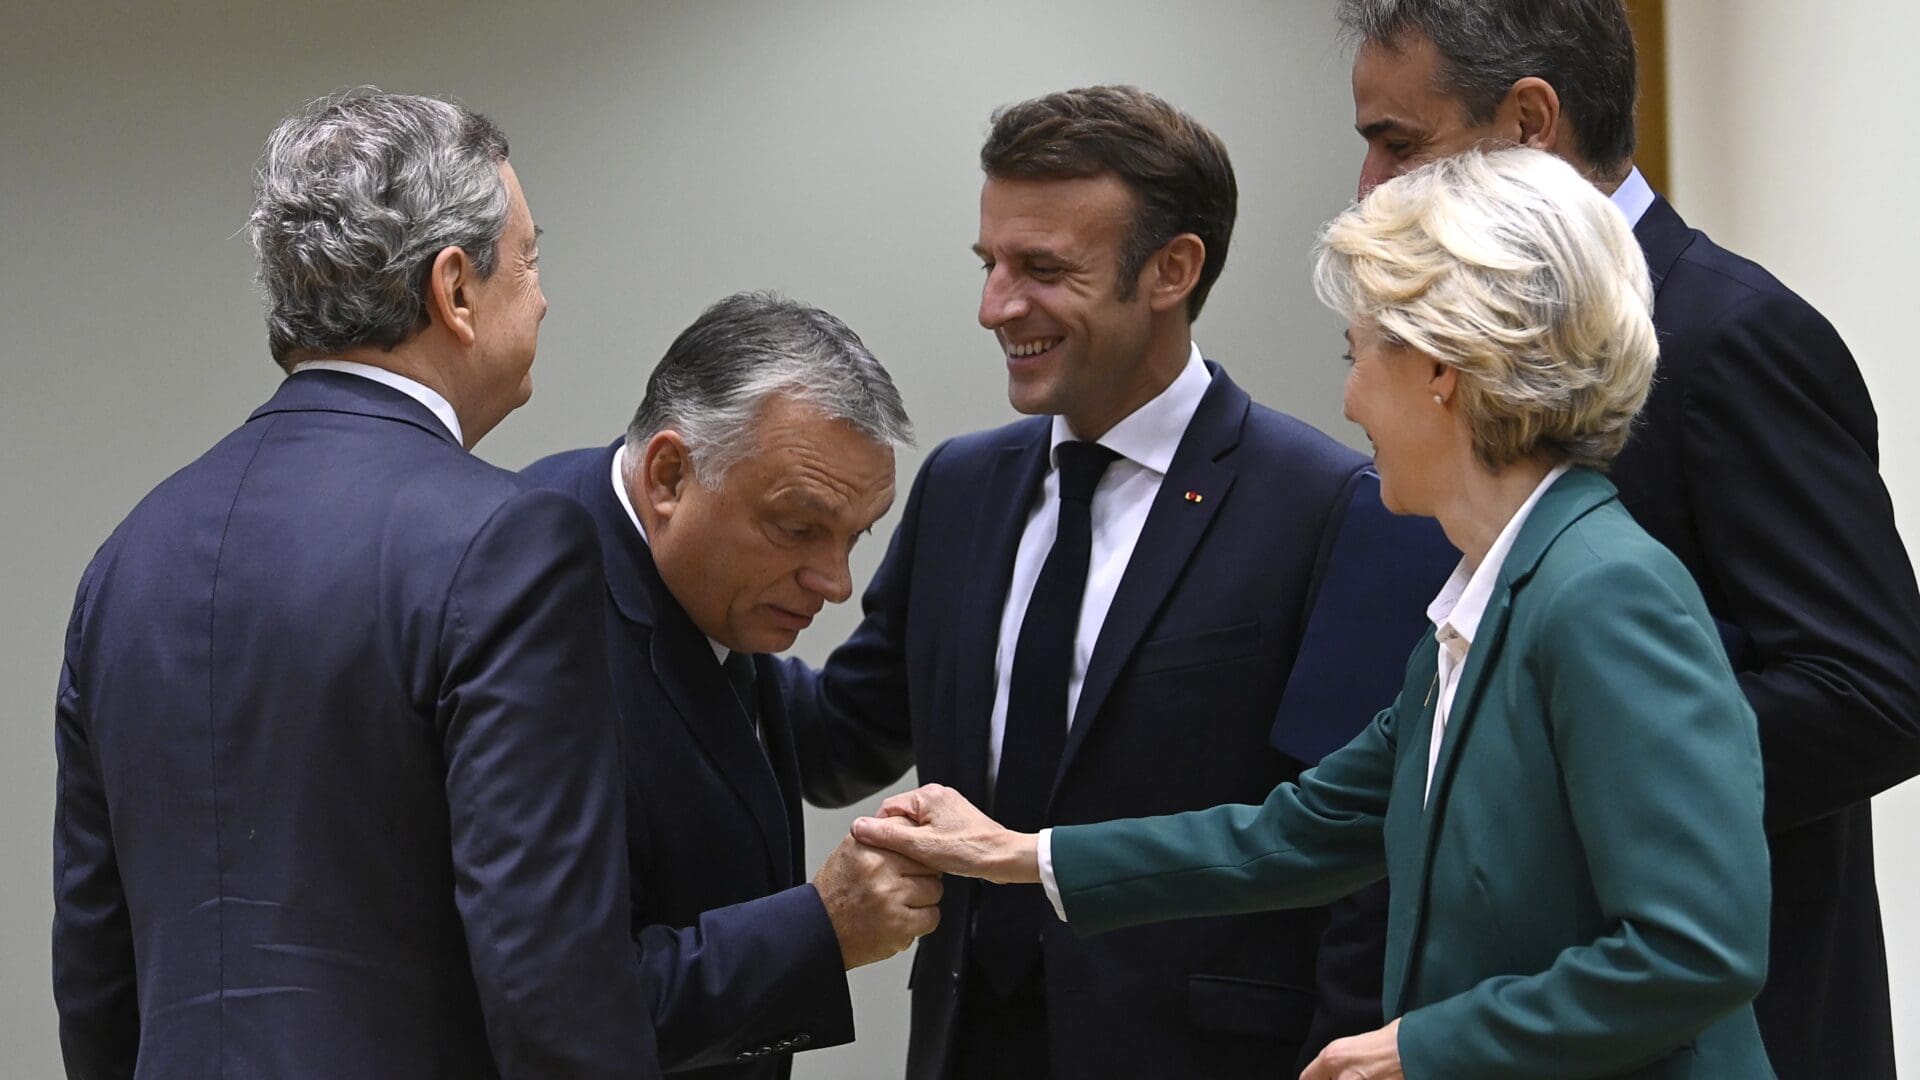 Hungary's Prime Minister Viktor Orban (2nd L) shakes hands with President of the European Commission Ursula von der Leyen (R) as Italy's Prime Minister Mario Draghi (L), France's President Emmanuel Macron (C) and Greece's Prime Minister Kyriakos Mitsotakis (2nd R) look on the second day of a EU leaders Summit at The European Council Building in Brussels on October 21, 2022.